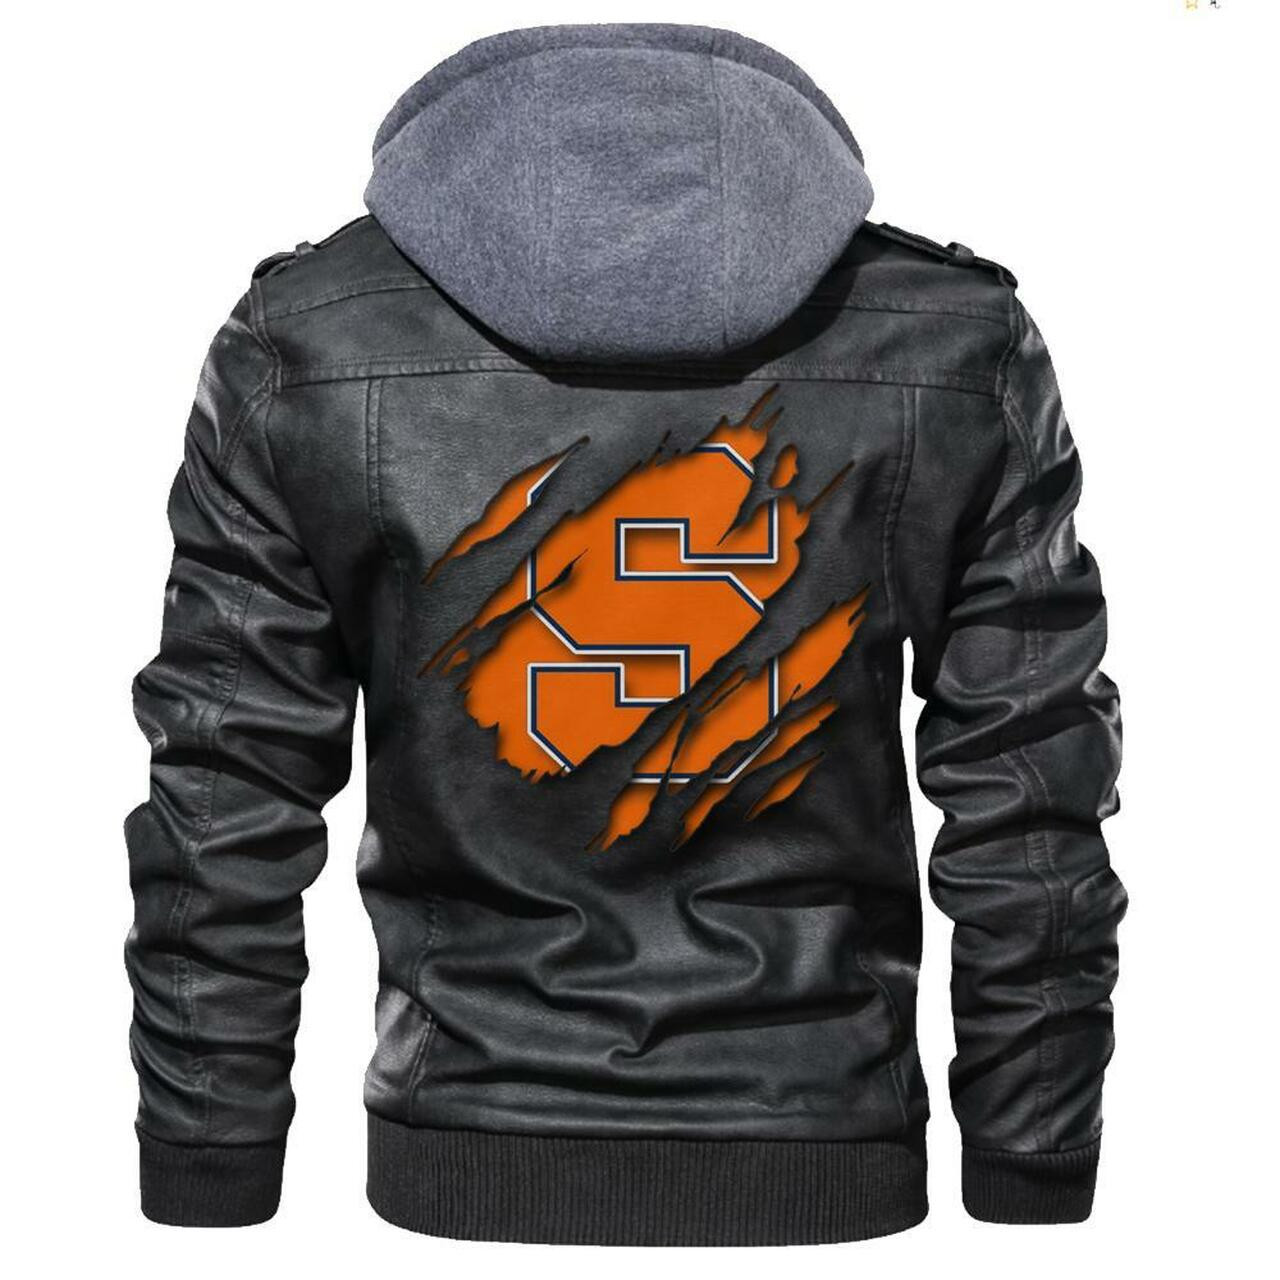 Check out and find the right leather jacket below 113